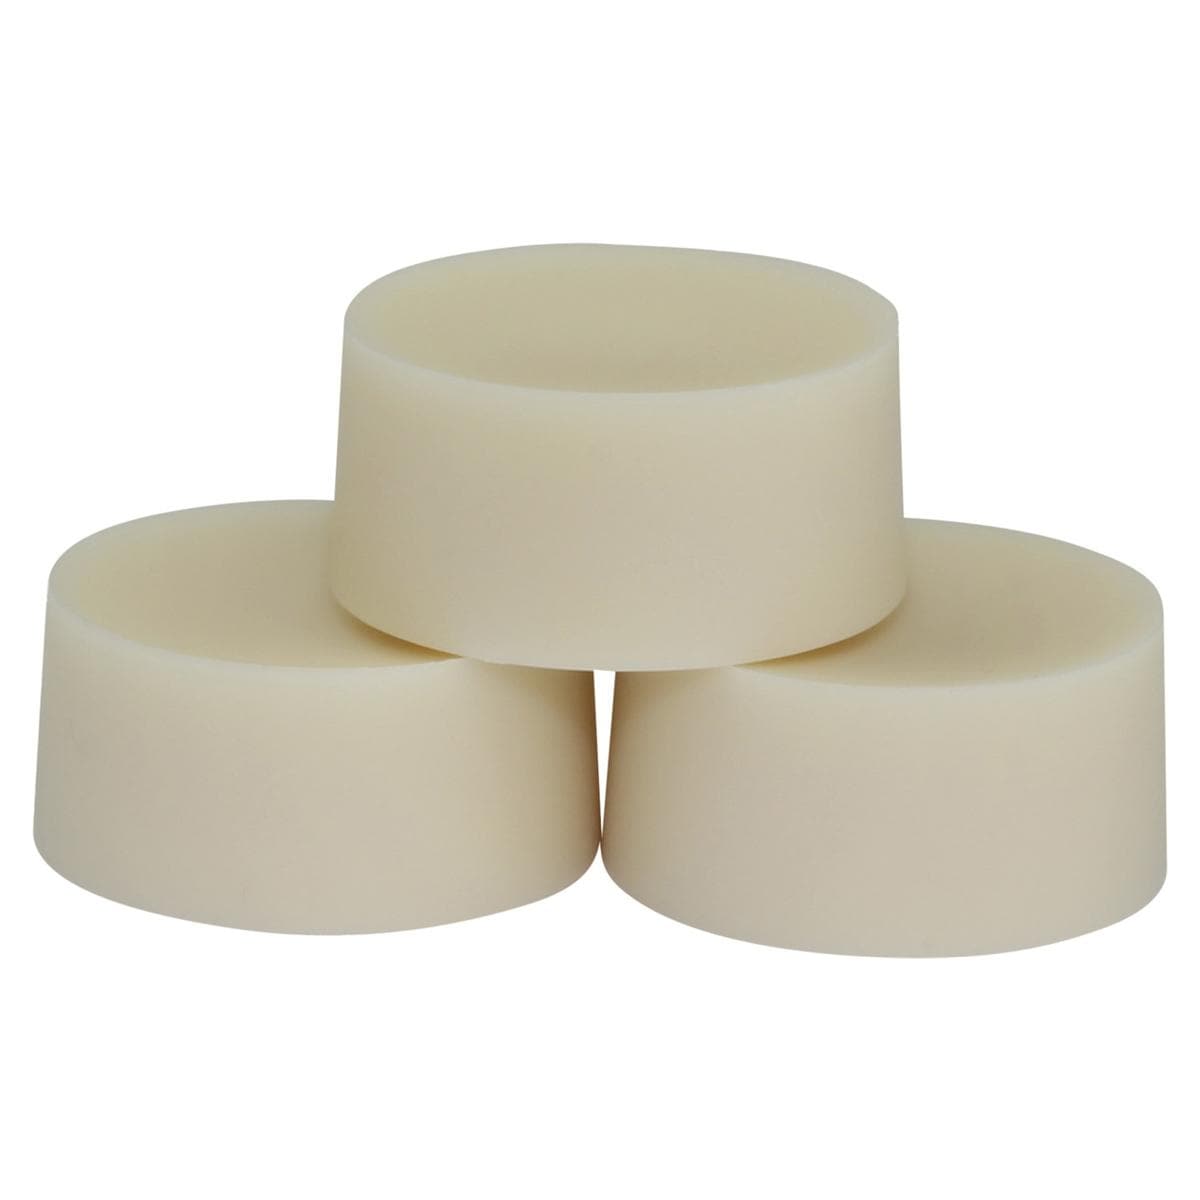 CONTACT Modellierwachschip - Ivory, Packung 3 x 25 g